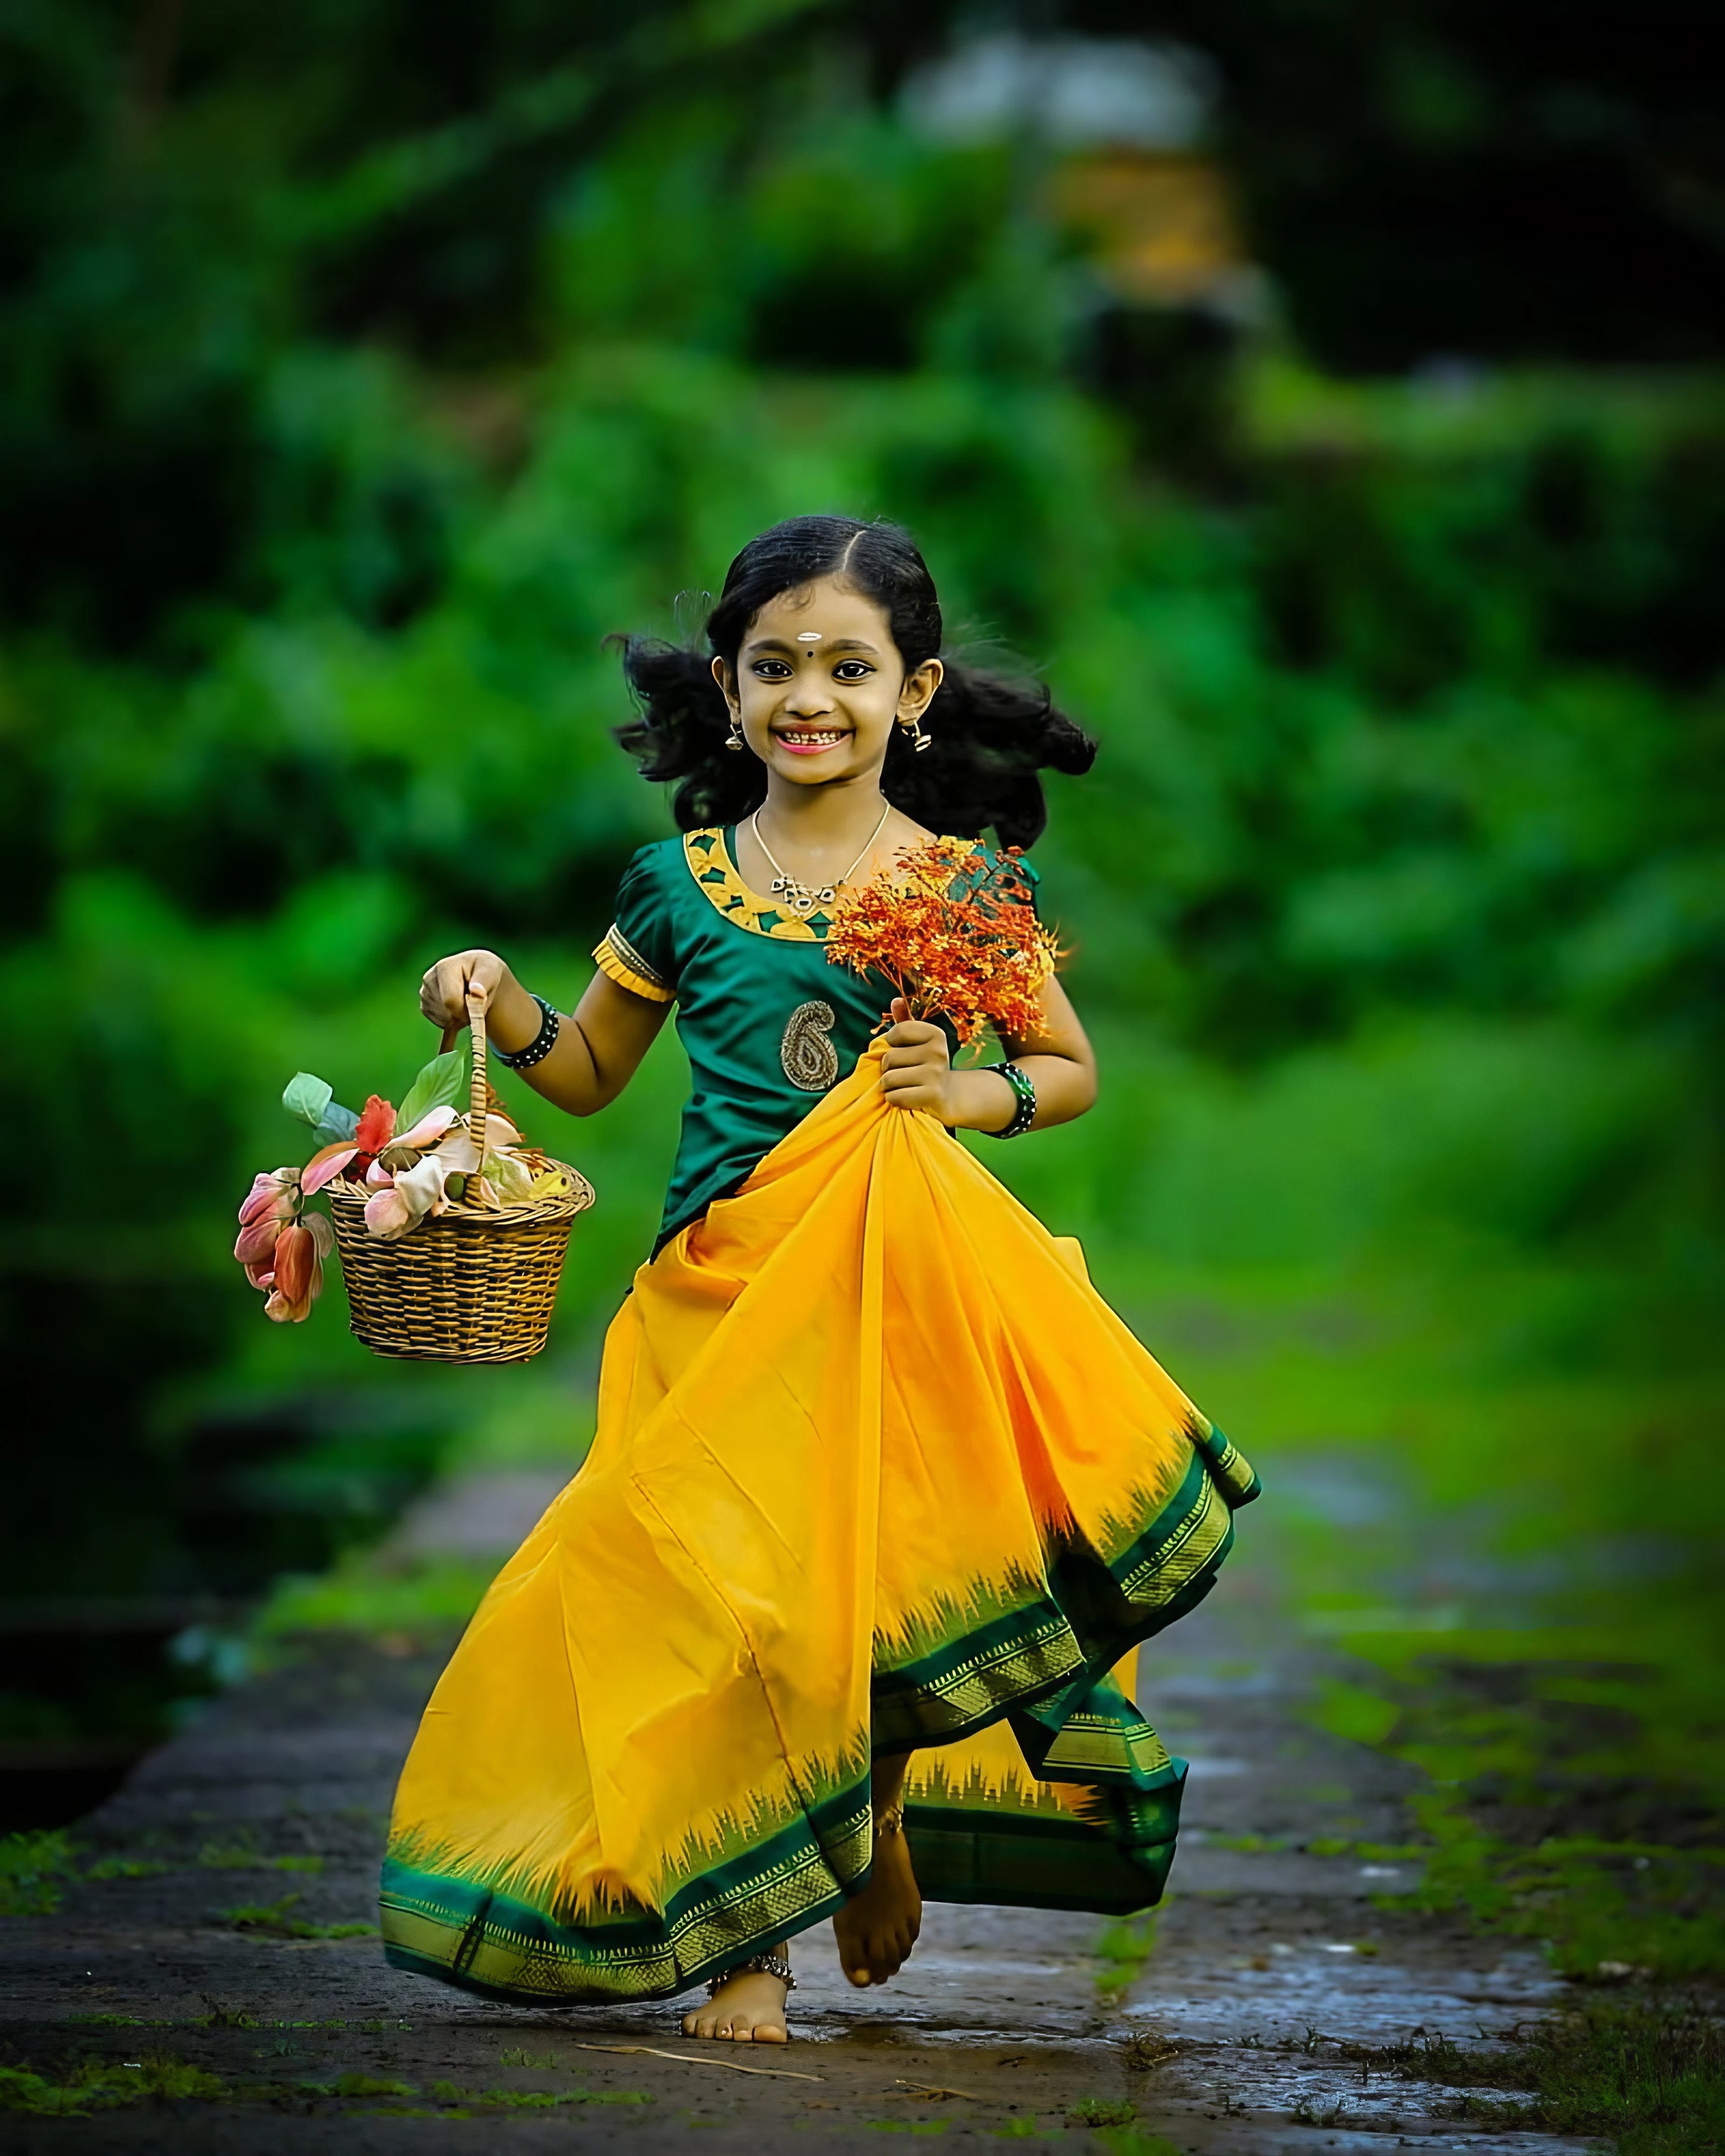 Tamil Style - baby girl in yellow dress